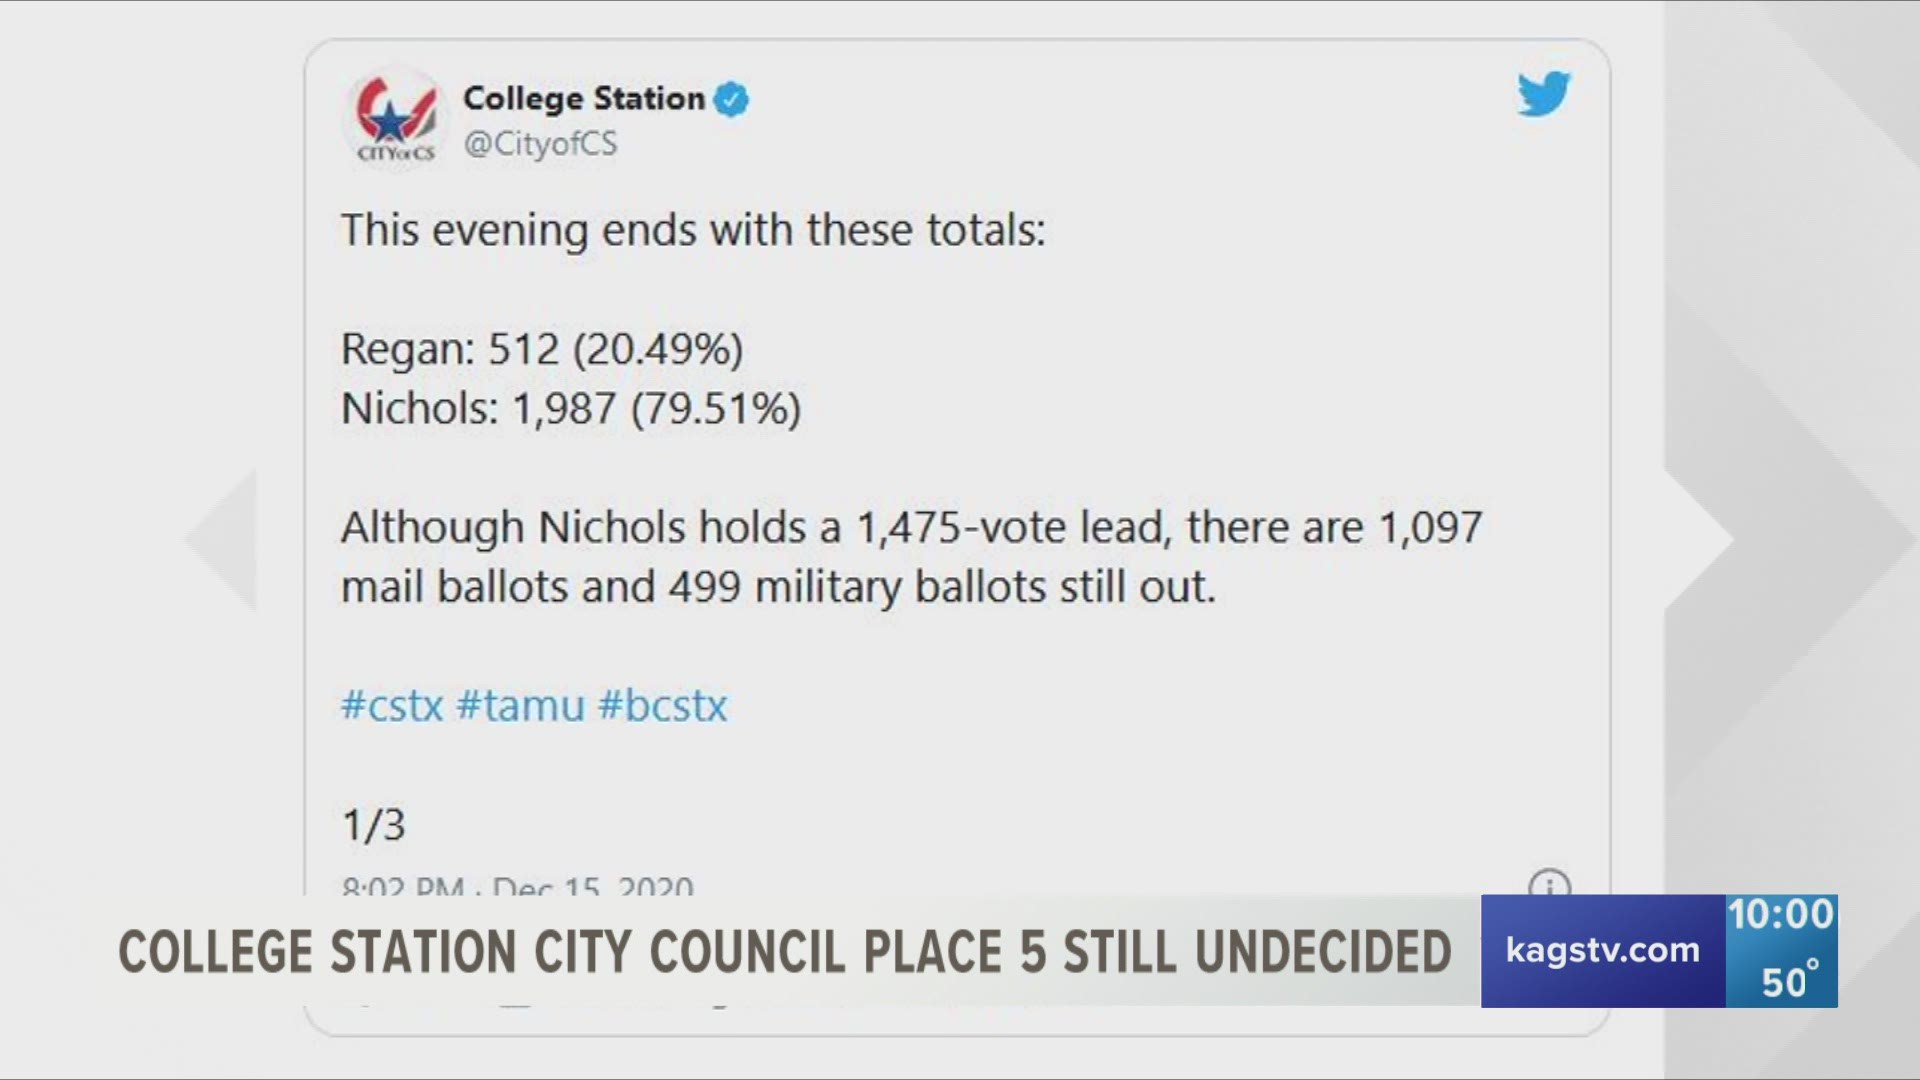 The runoff race results won't likely have concrete results until Dec. 21, 2020.